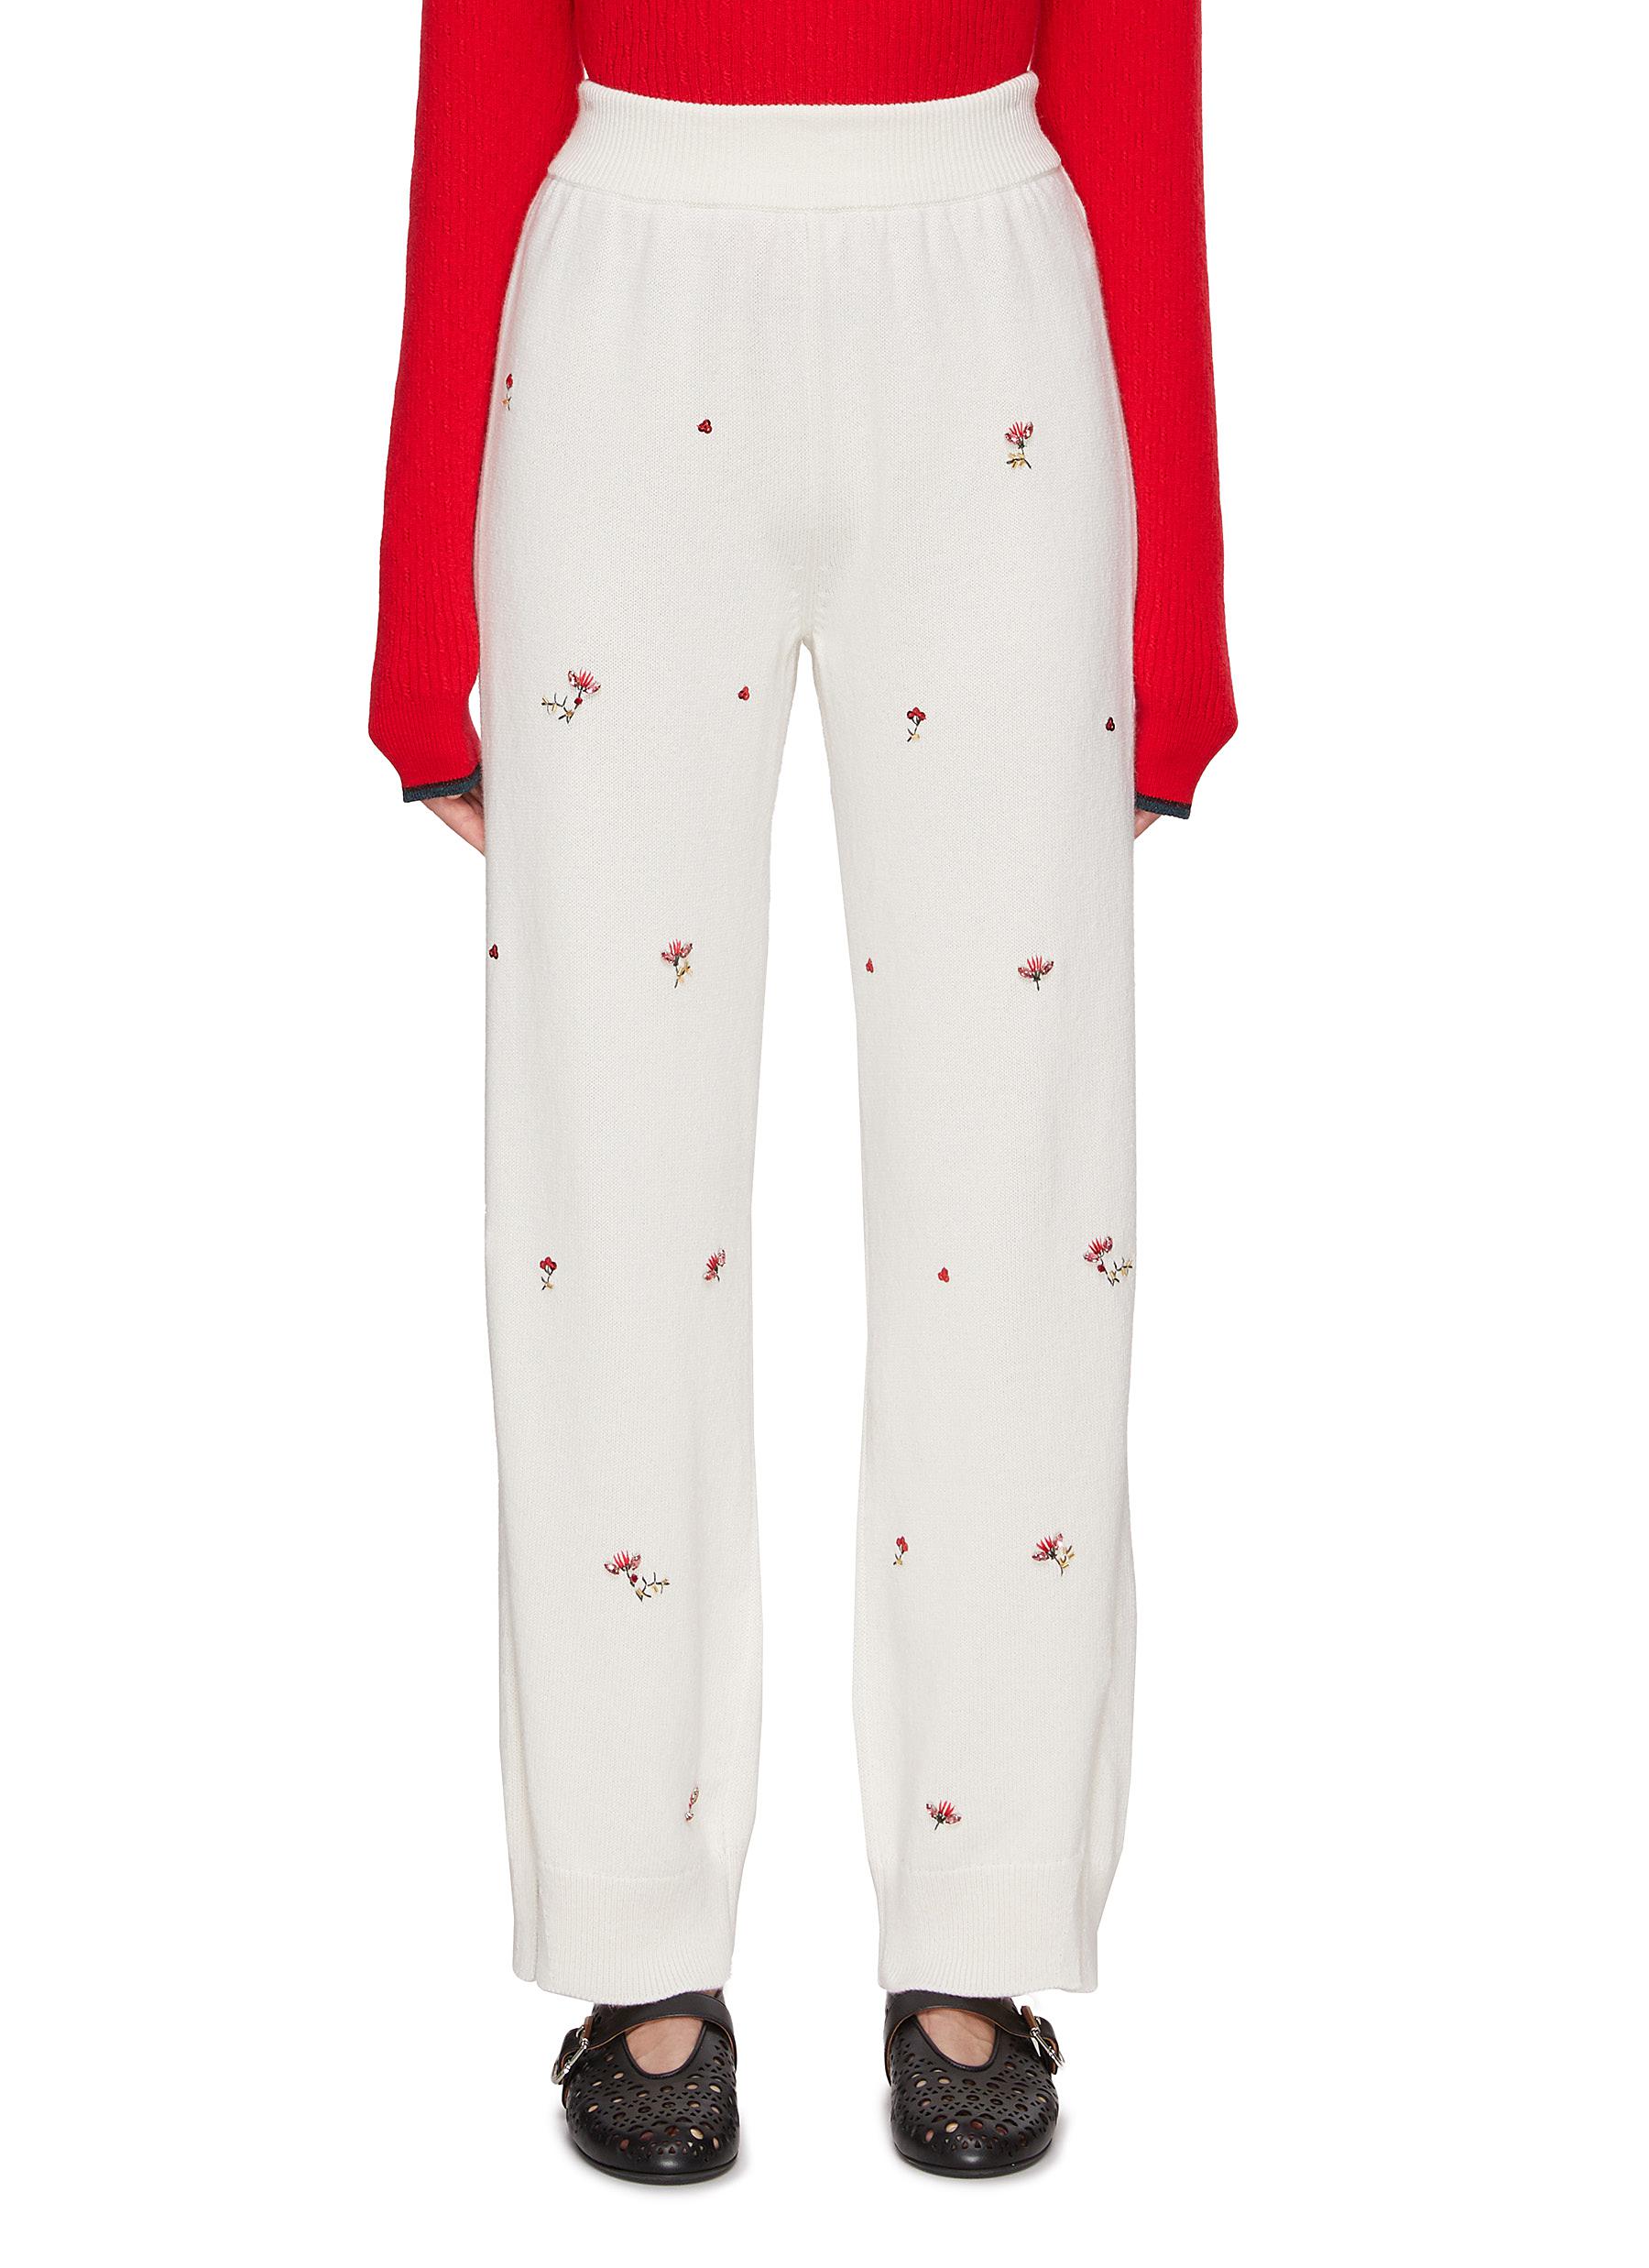 BARRIE CASHMERE EMBROIDERED PANTS